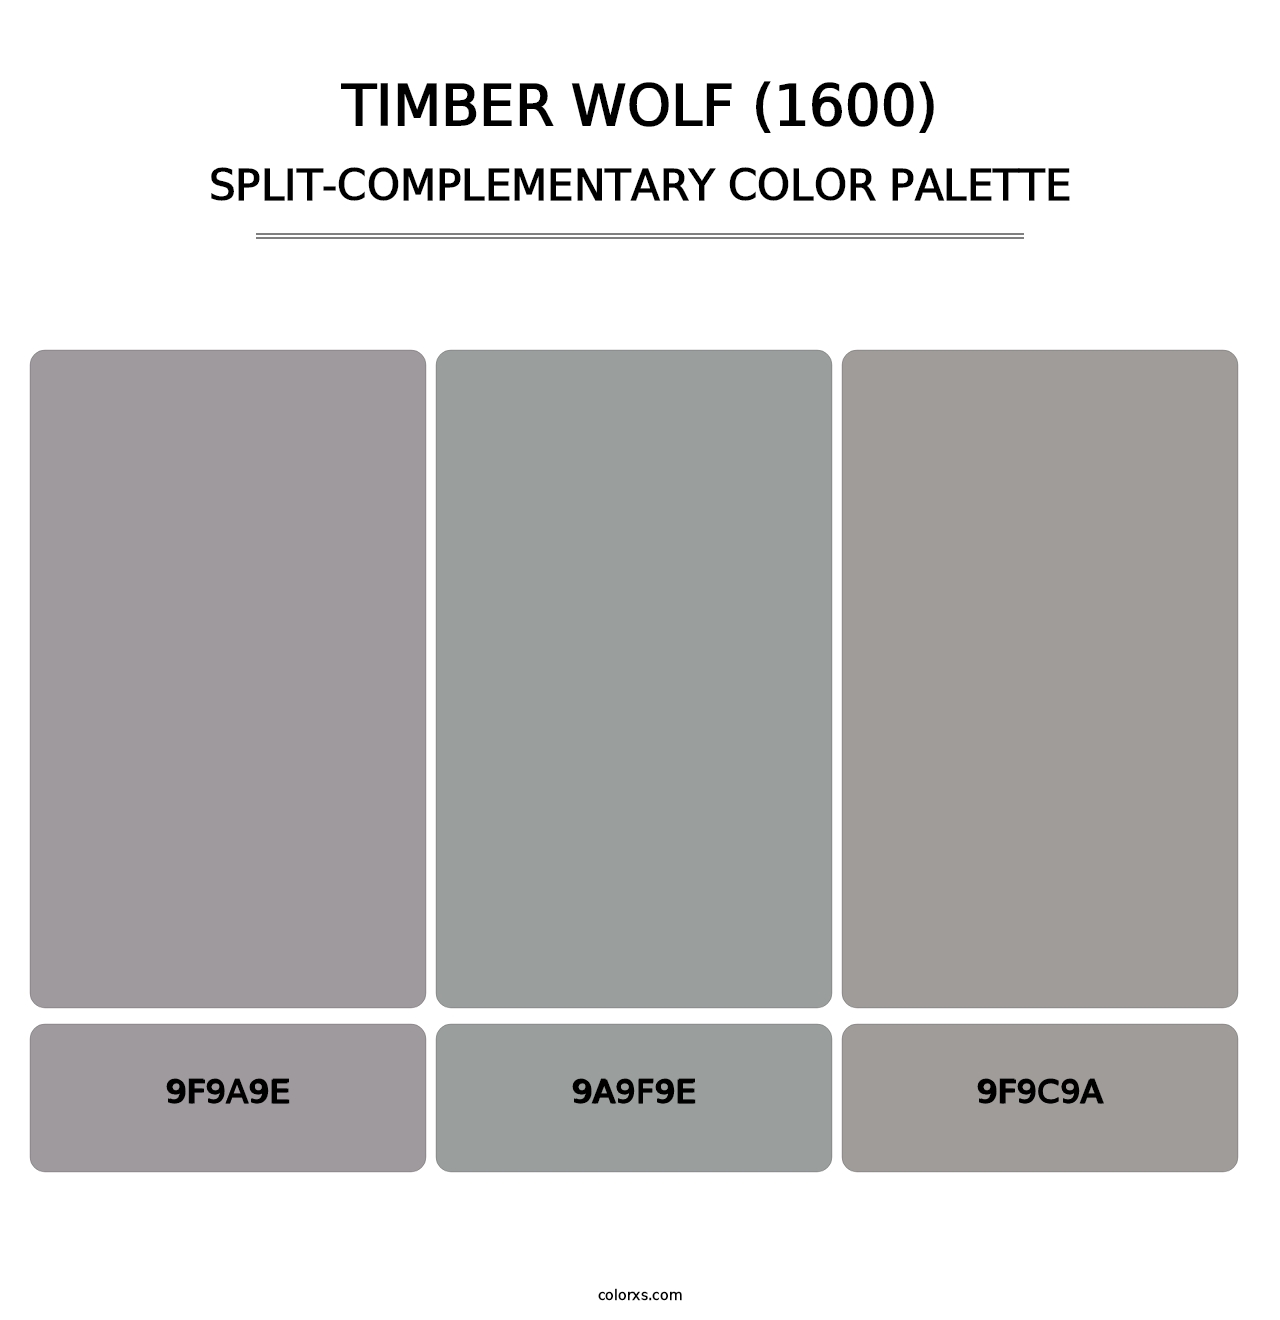 Timber Wolf (1600) - Split-Complementary Color Palette